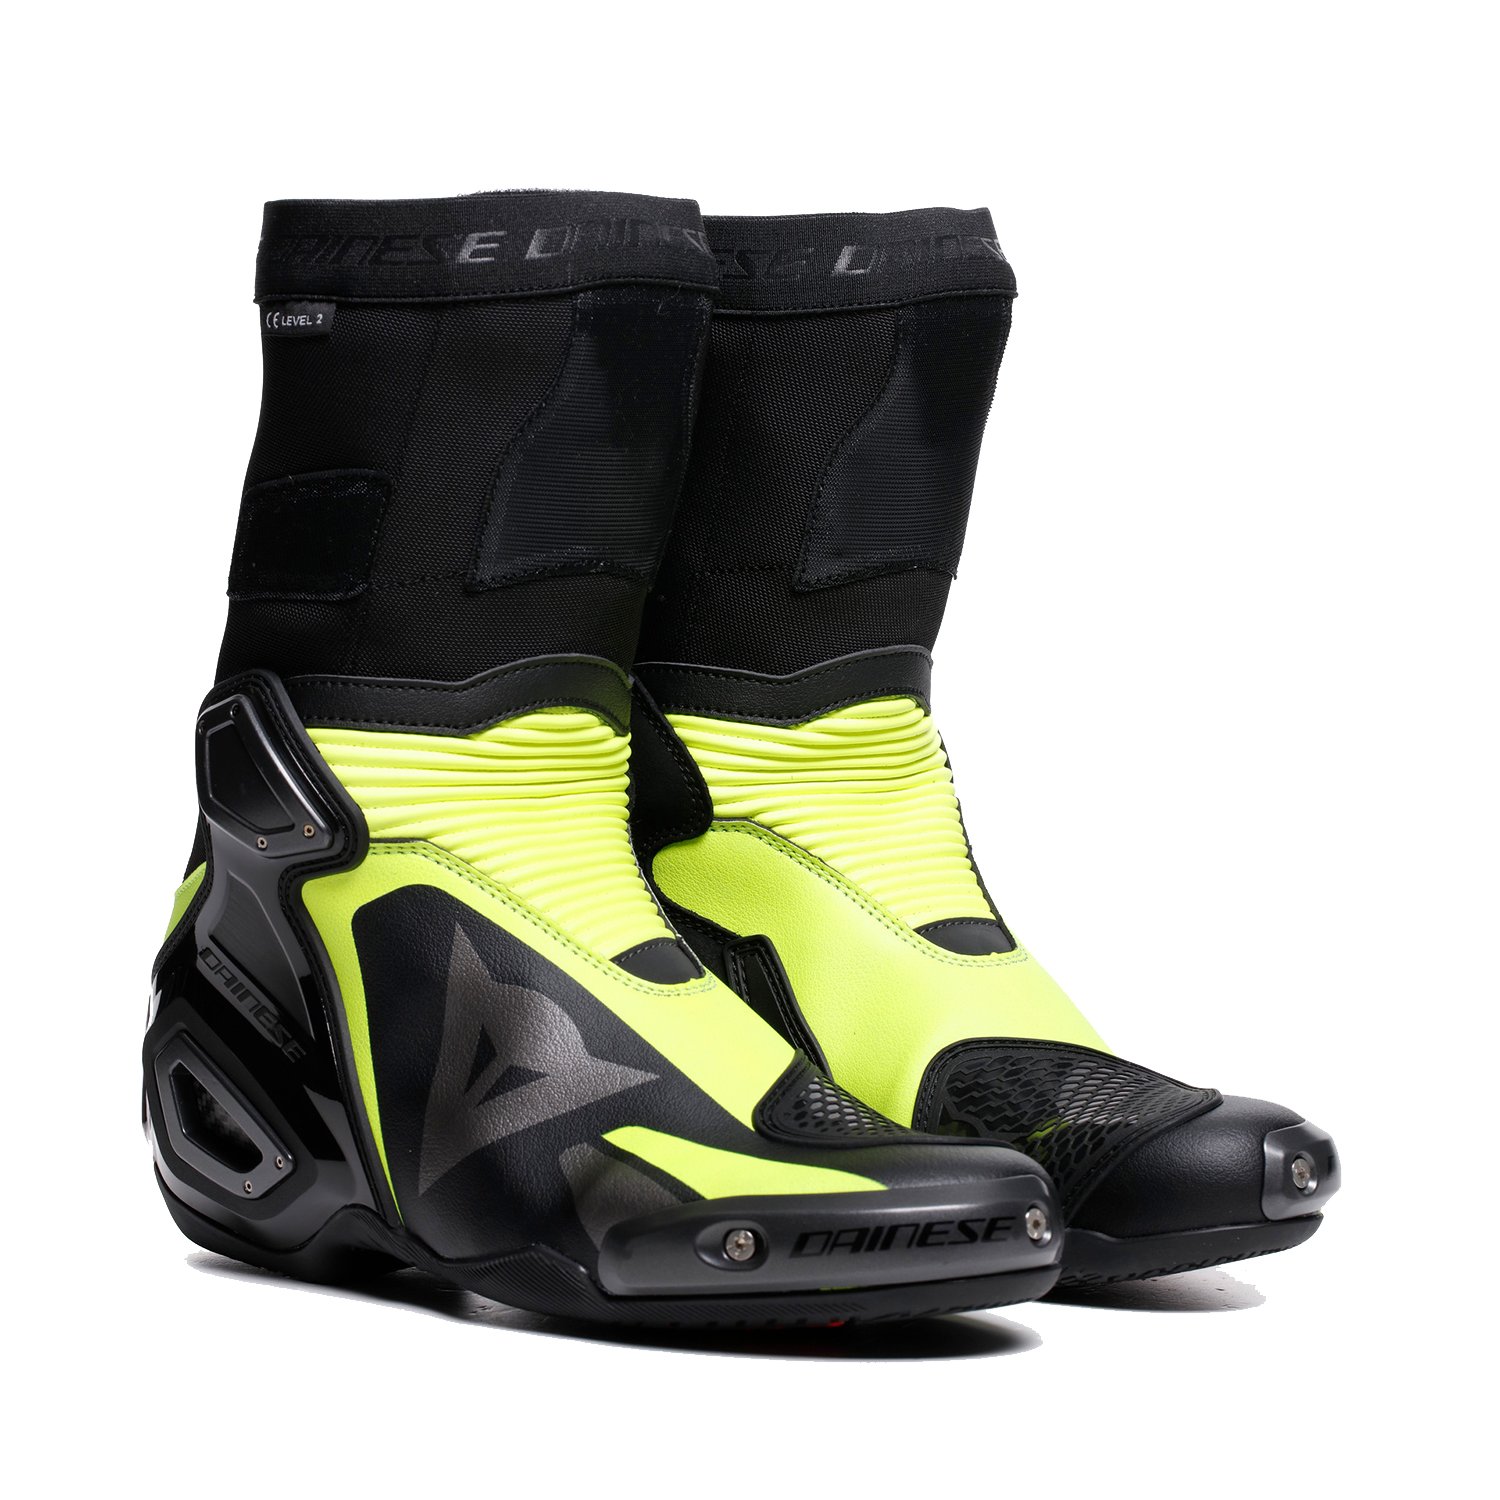 Image of Dainese Axial 2 Boots Black Yellow Fluo Taille 43